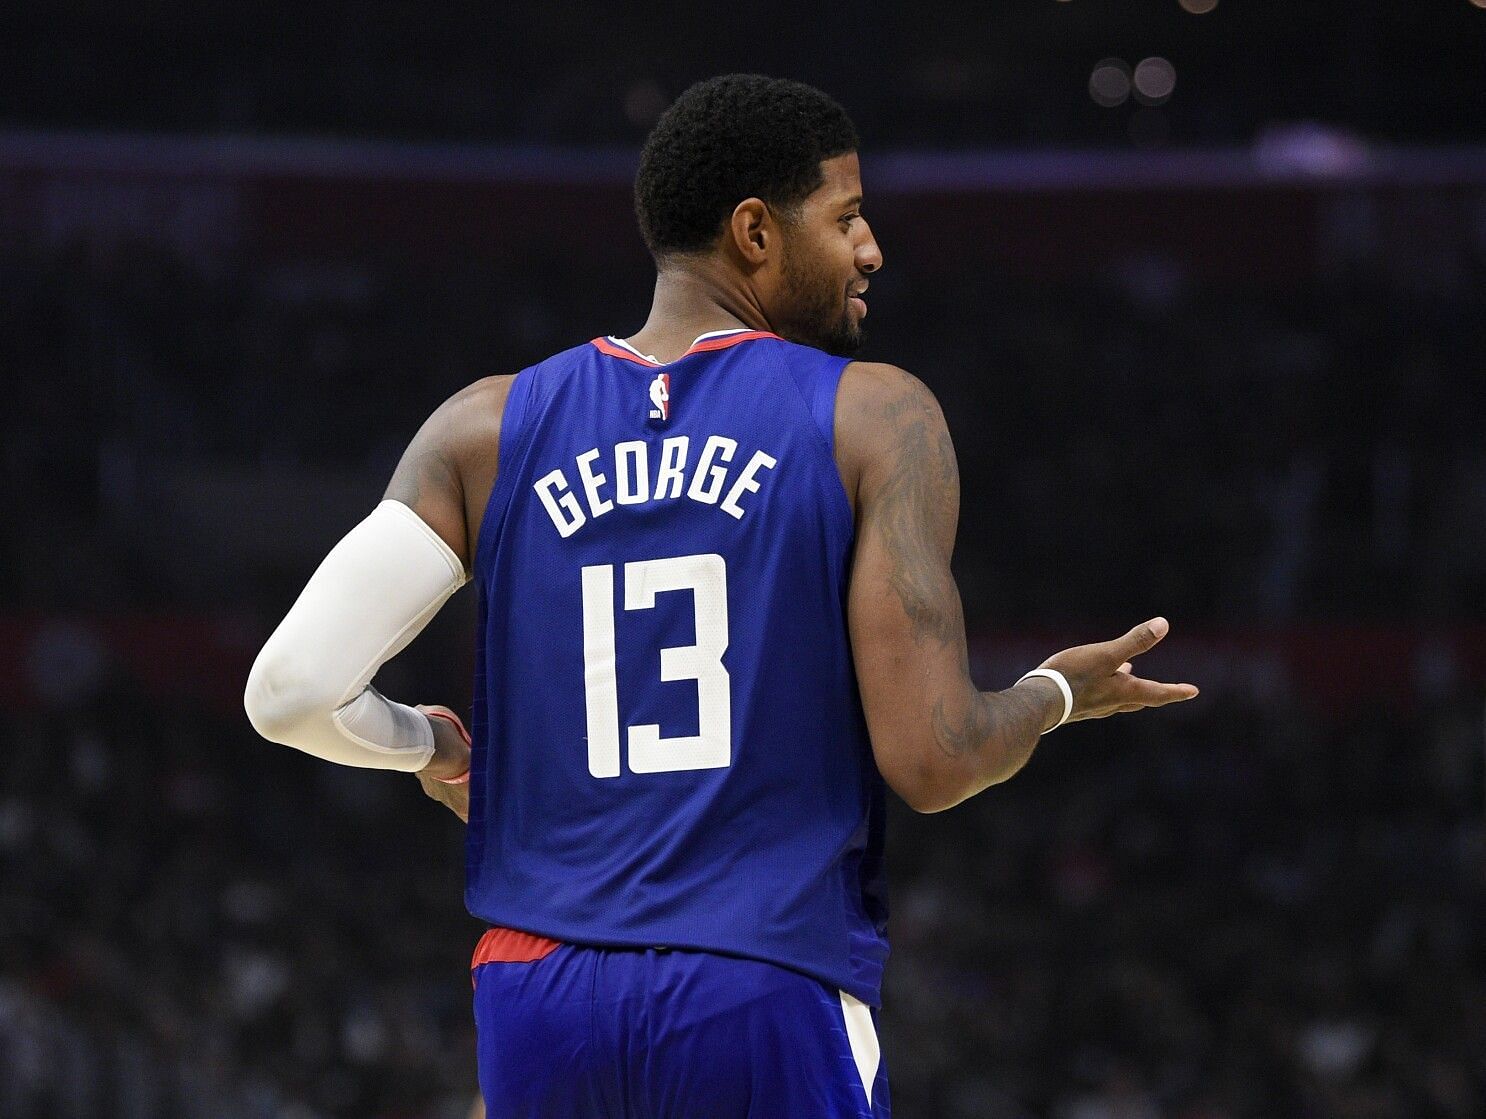 Paul George has been outstanding for the Los Angeles Clippers so far during the NBA season